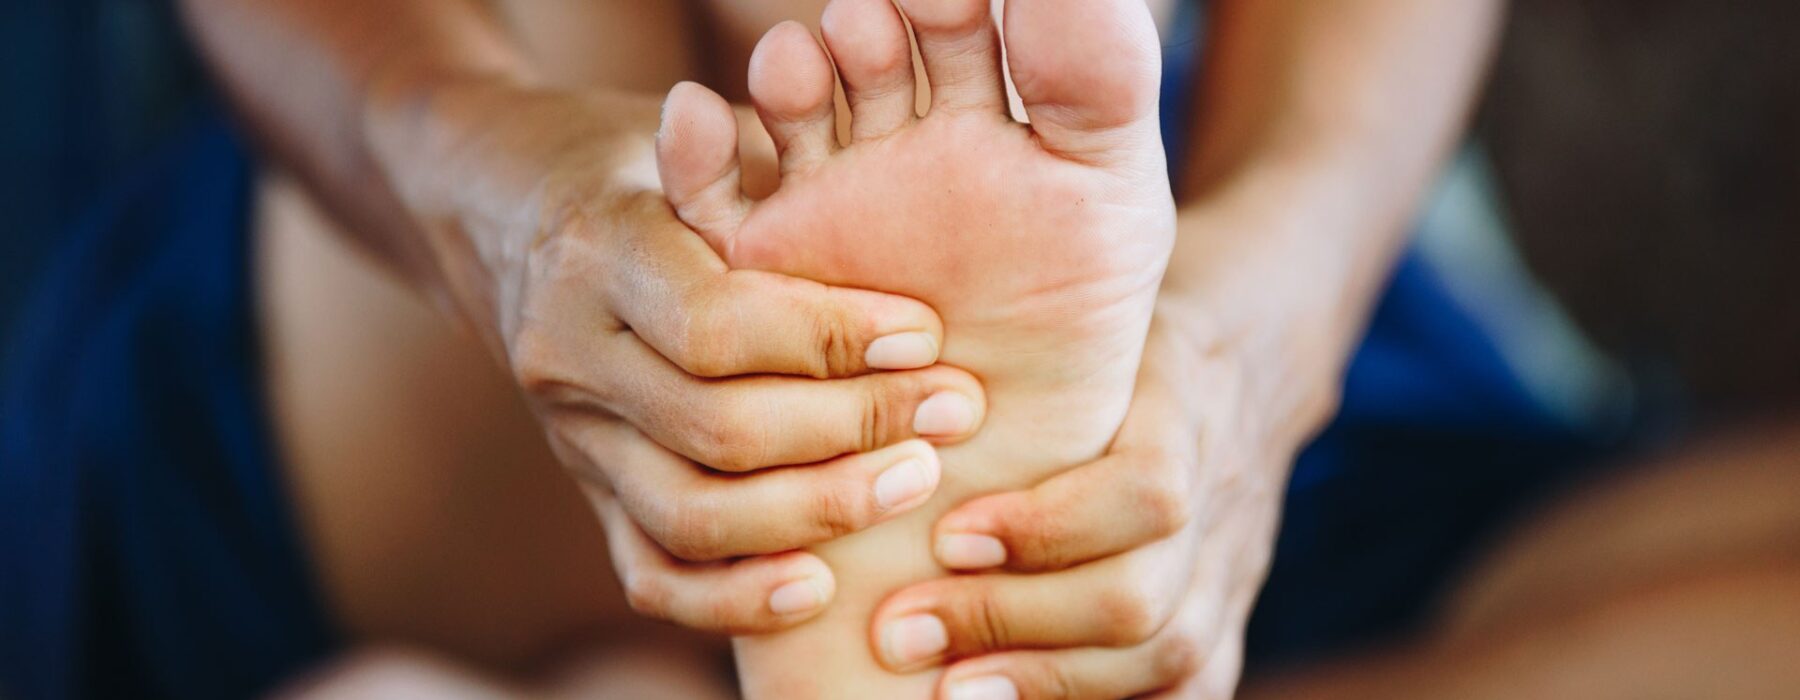 Podiatry - Wakefield Sports + Exercise Medicine Clinic